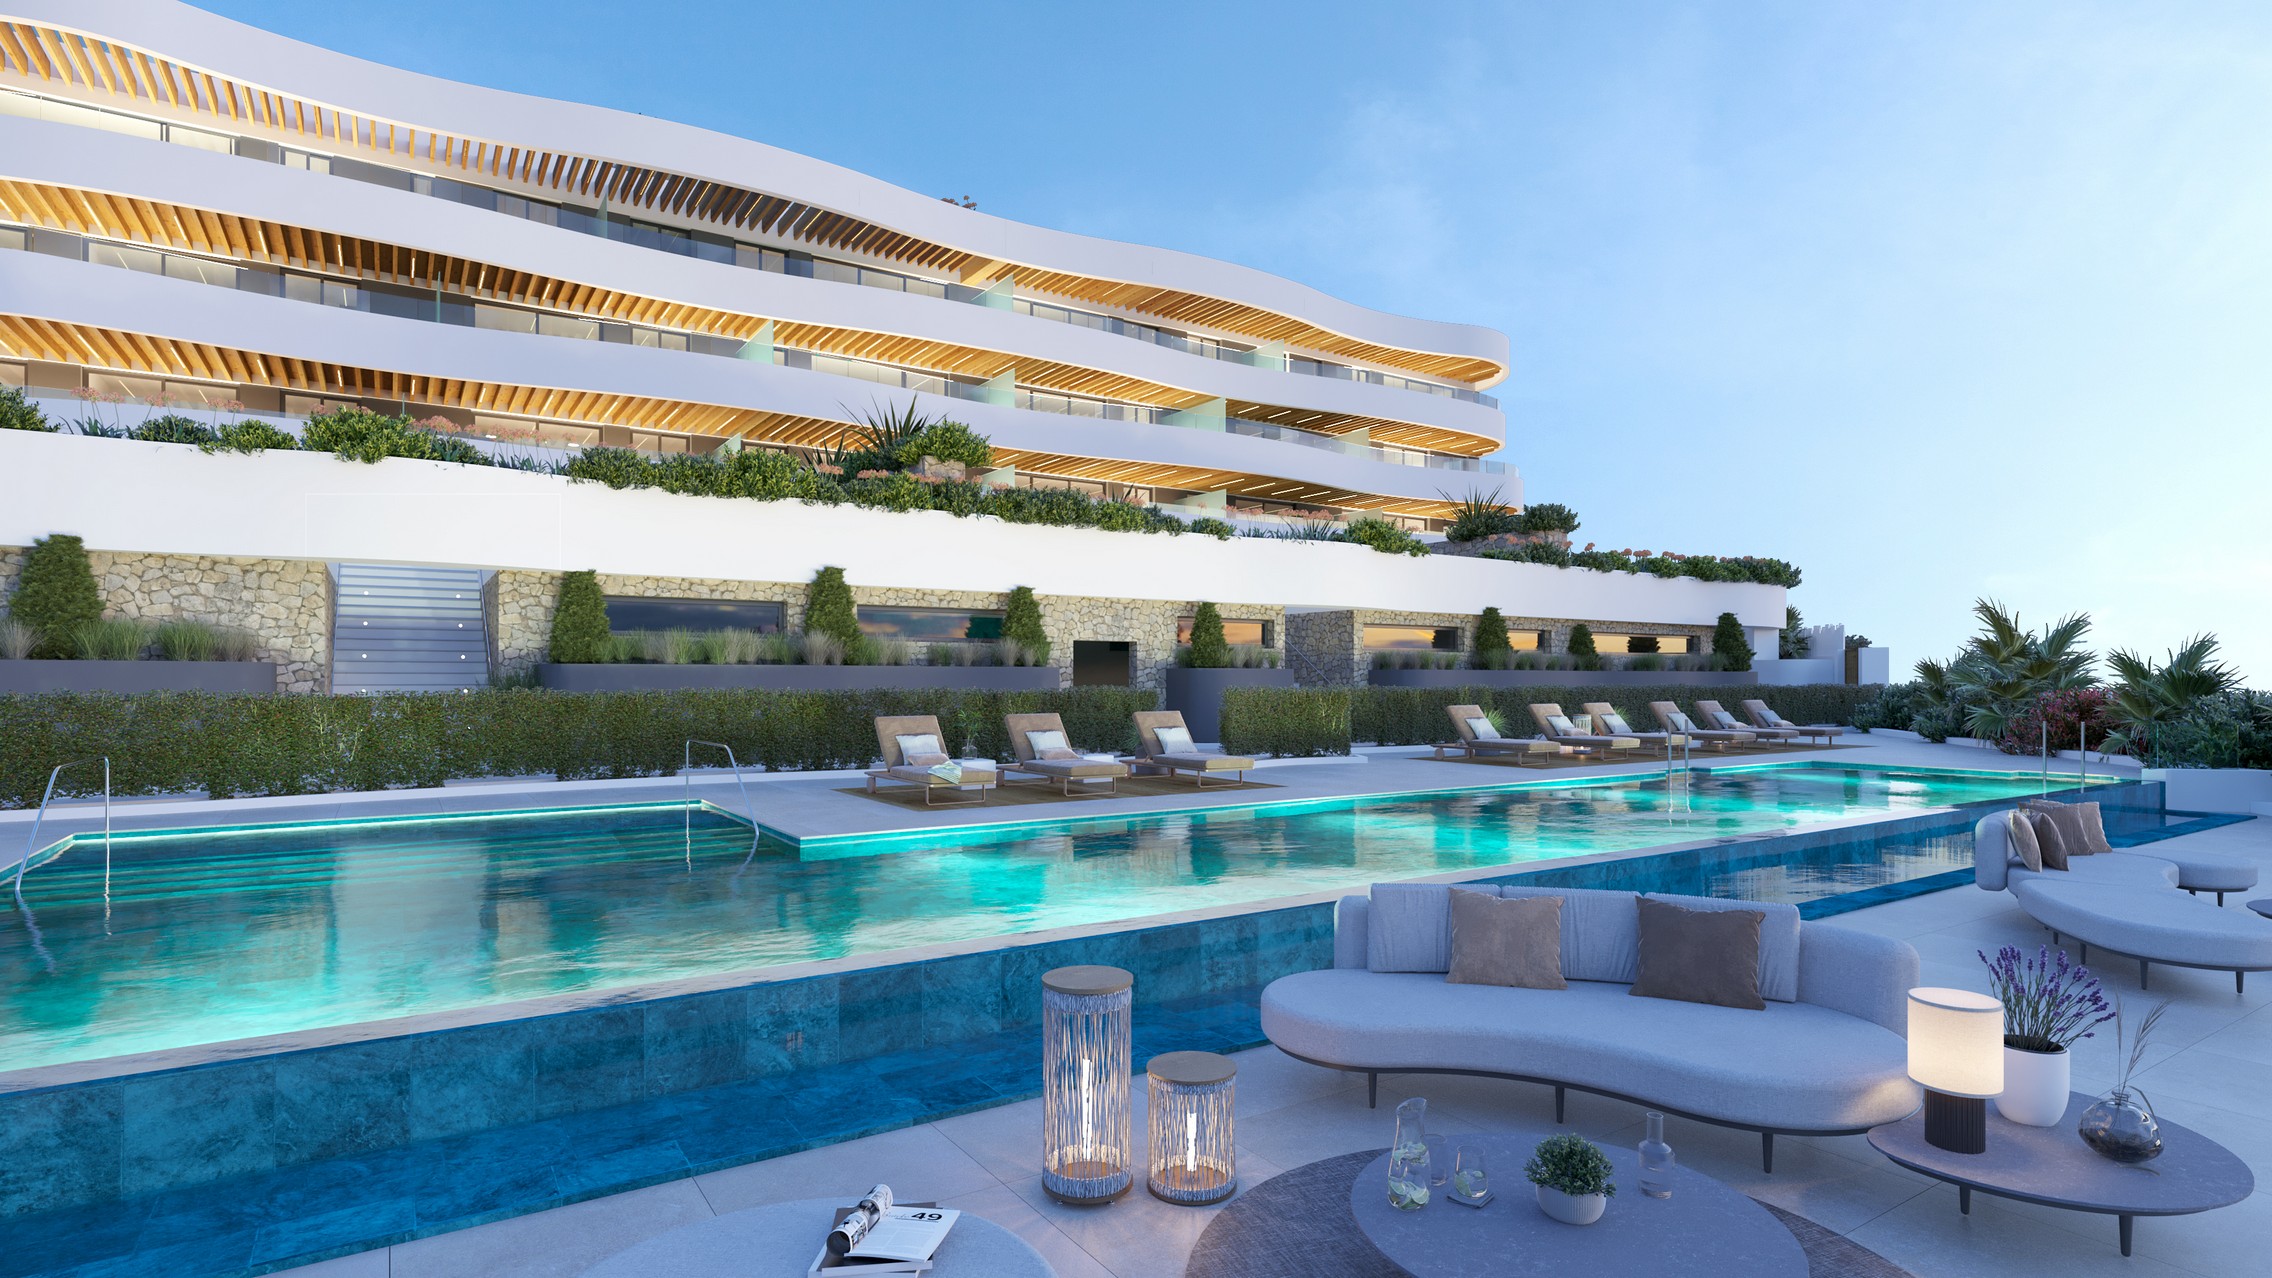 New Development on Costa del Sol: A Glimpse into Luxurious Living in Fuengirola